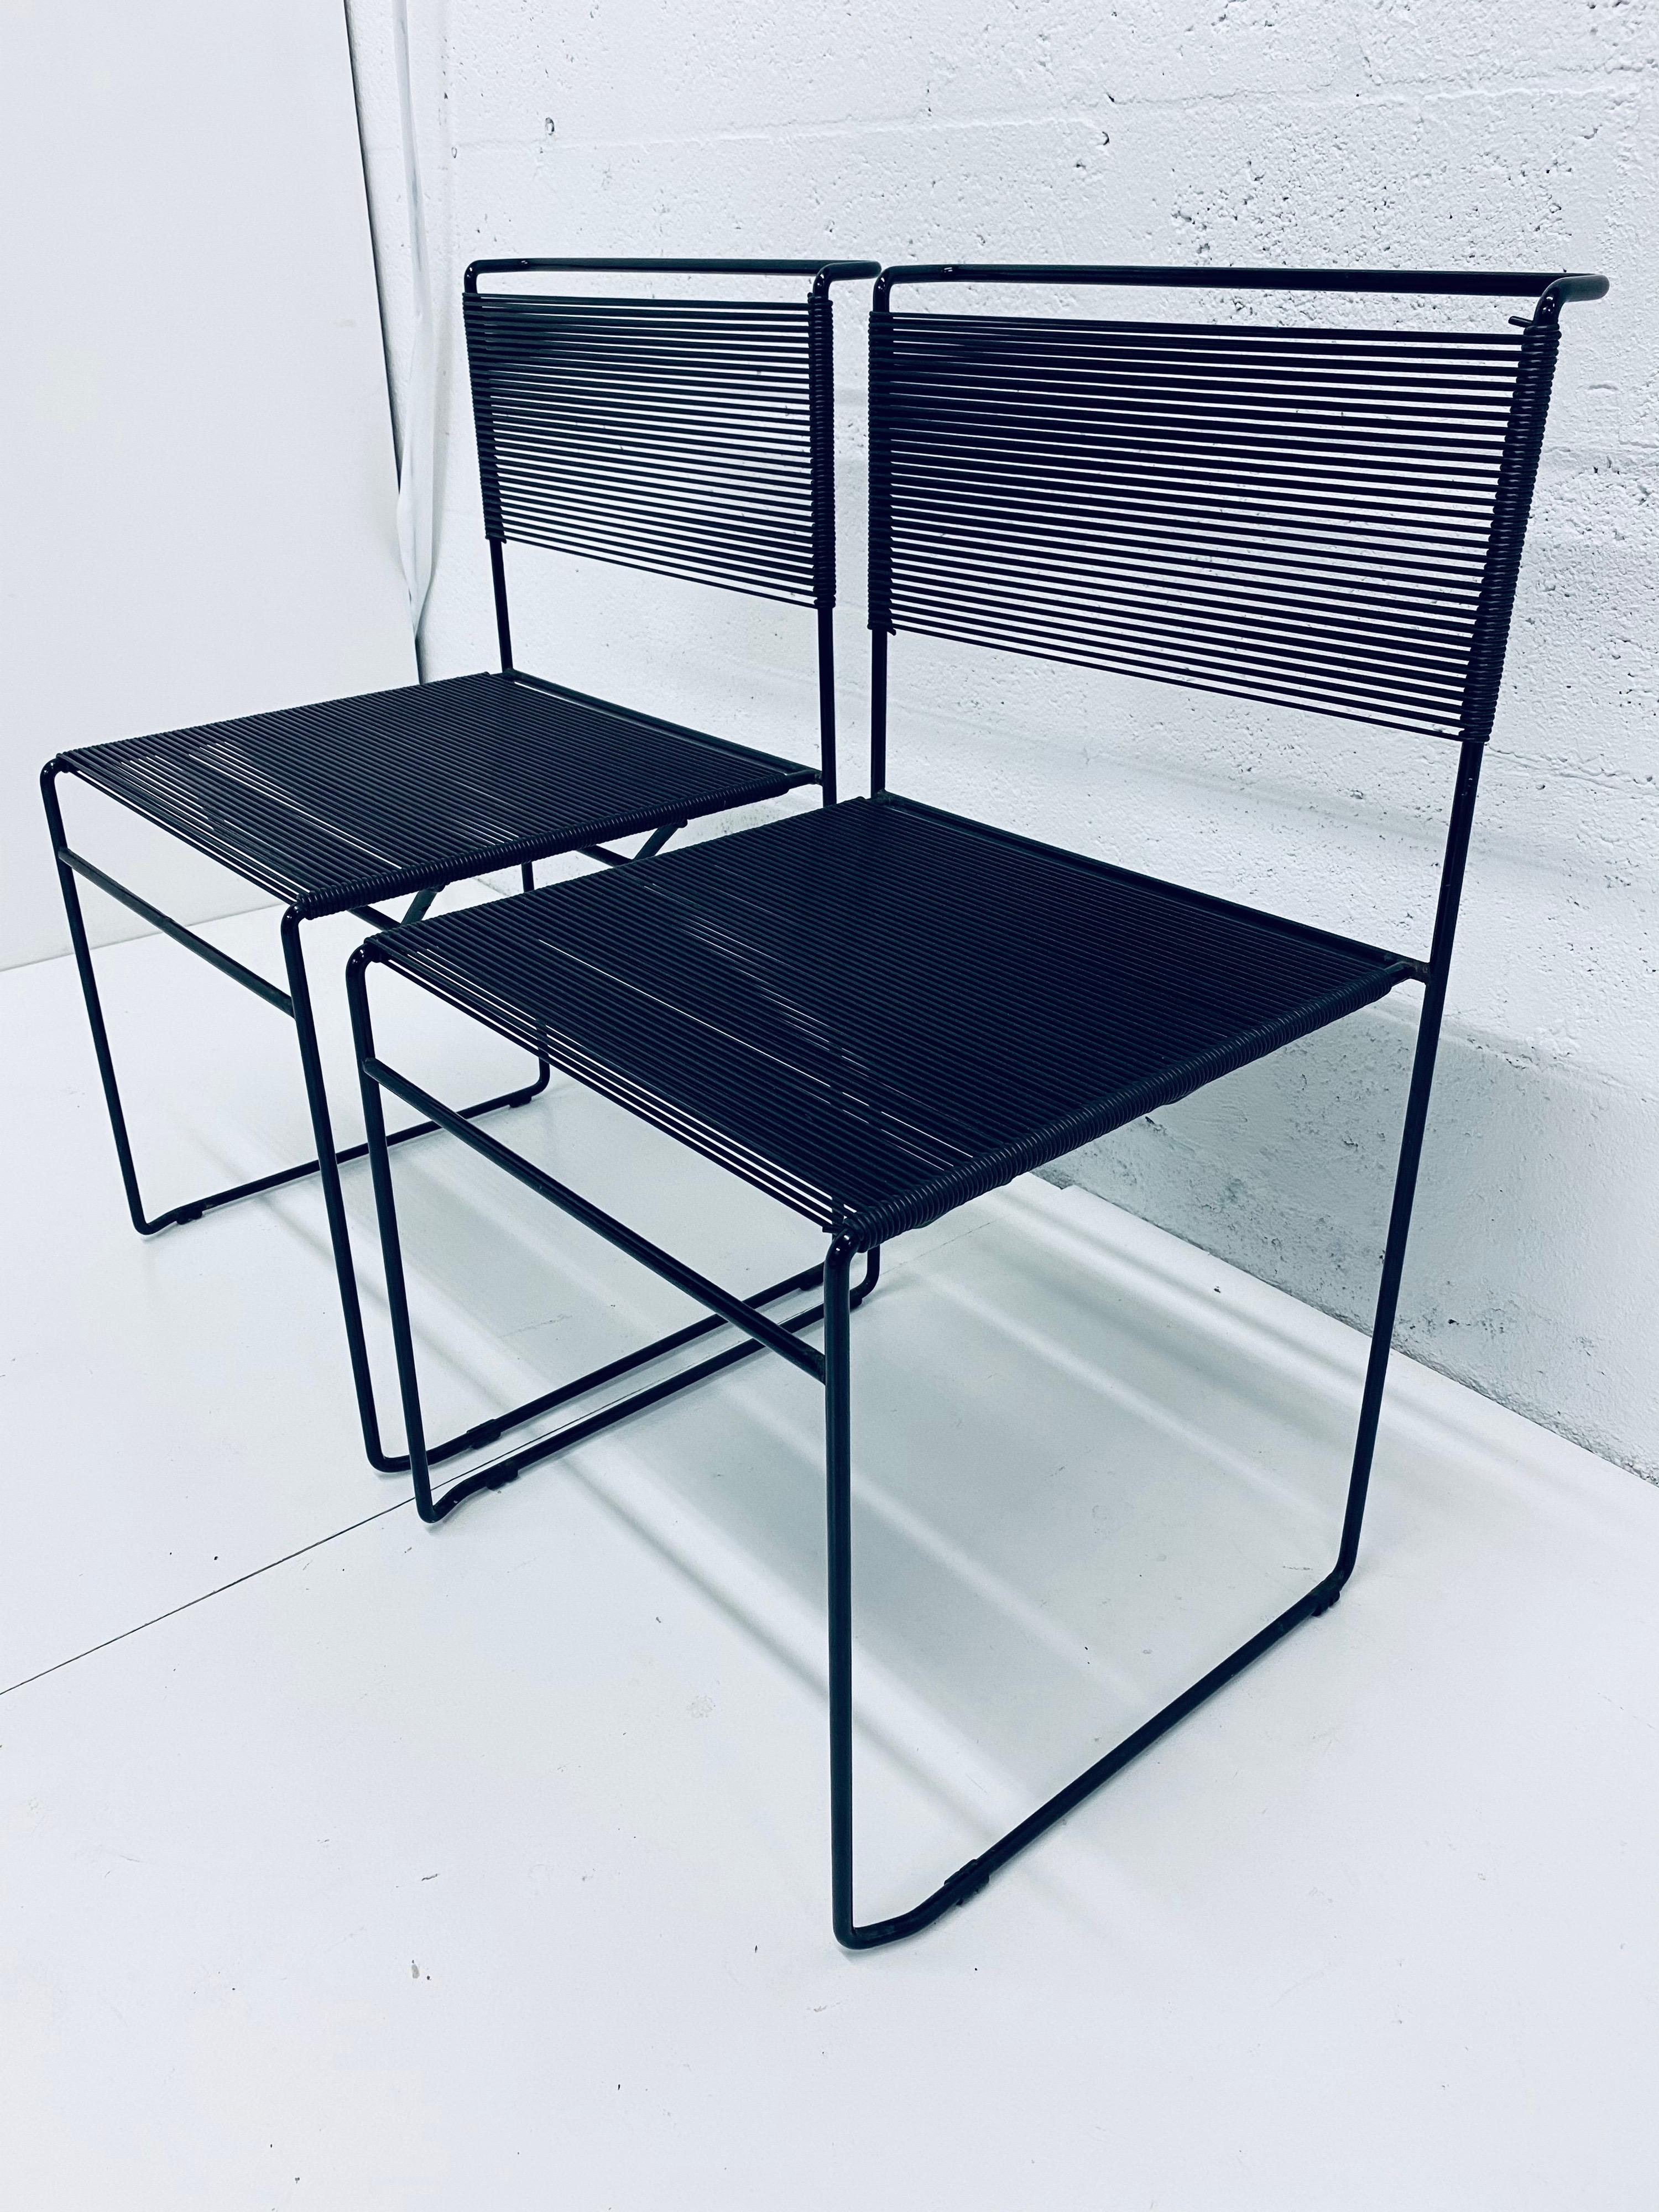 Designed by Giandomenico Belotti (1922-2004), this pair of Black Spaghetti chairs is quite comfortable with their PVC spaghetti straps on steel bases. A most successful design by Belotti, they are a part of the MoMA collection. This edition